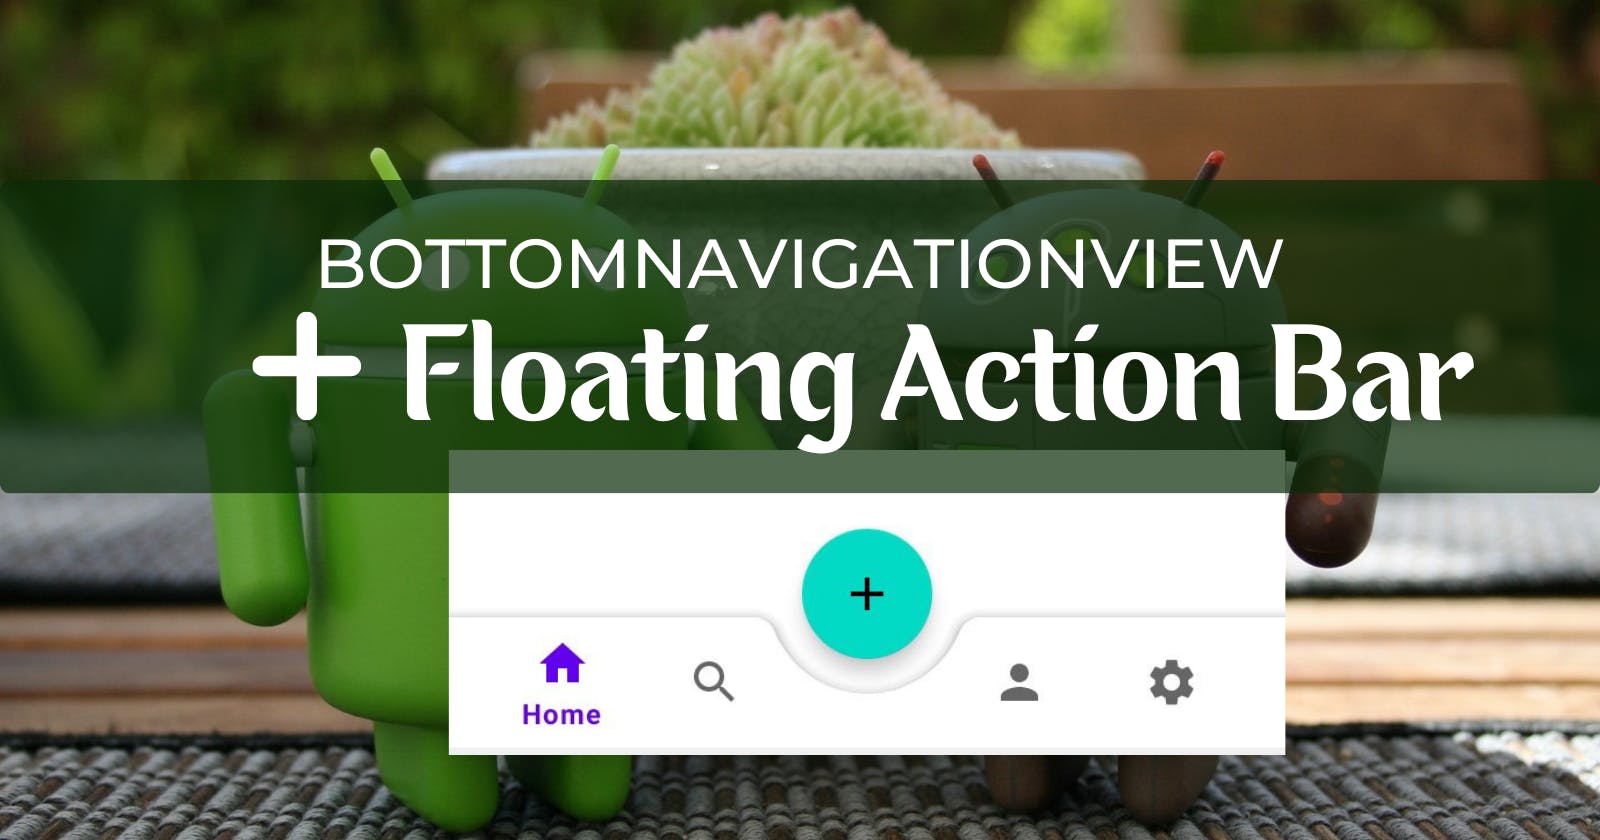 How to Set Up BottomNavigationView with a Floating Action Bar In Android